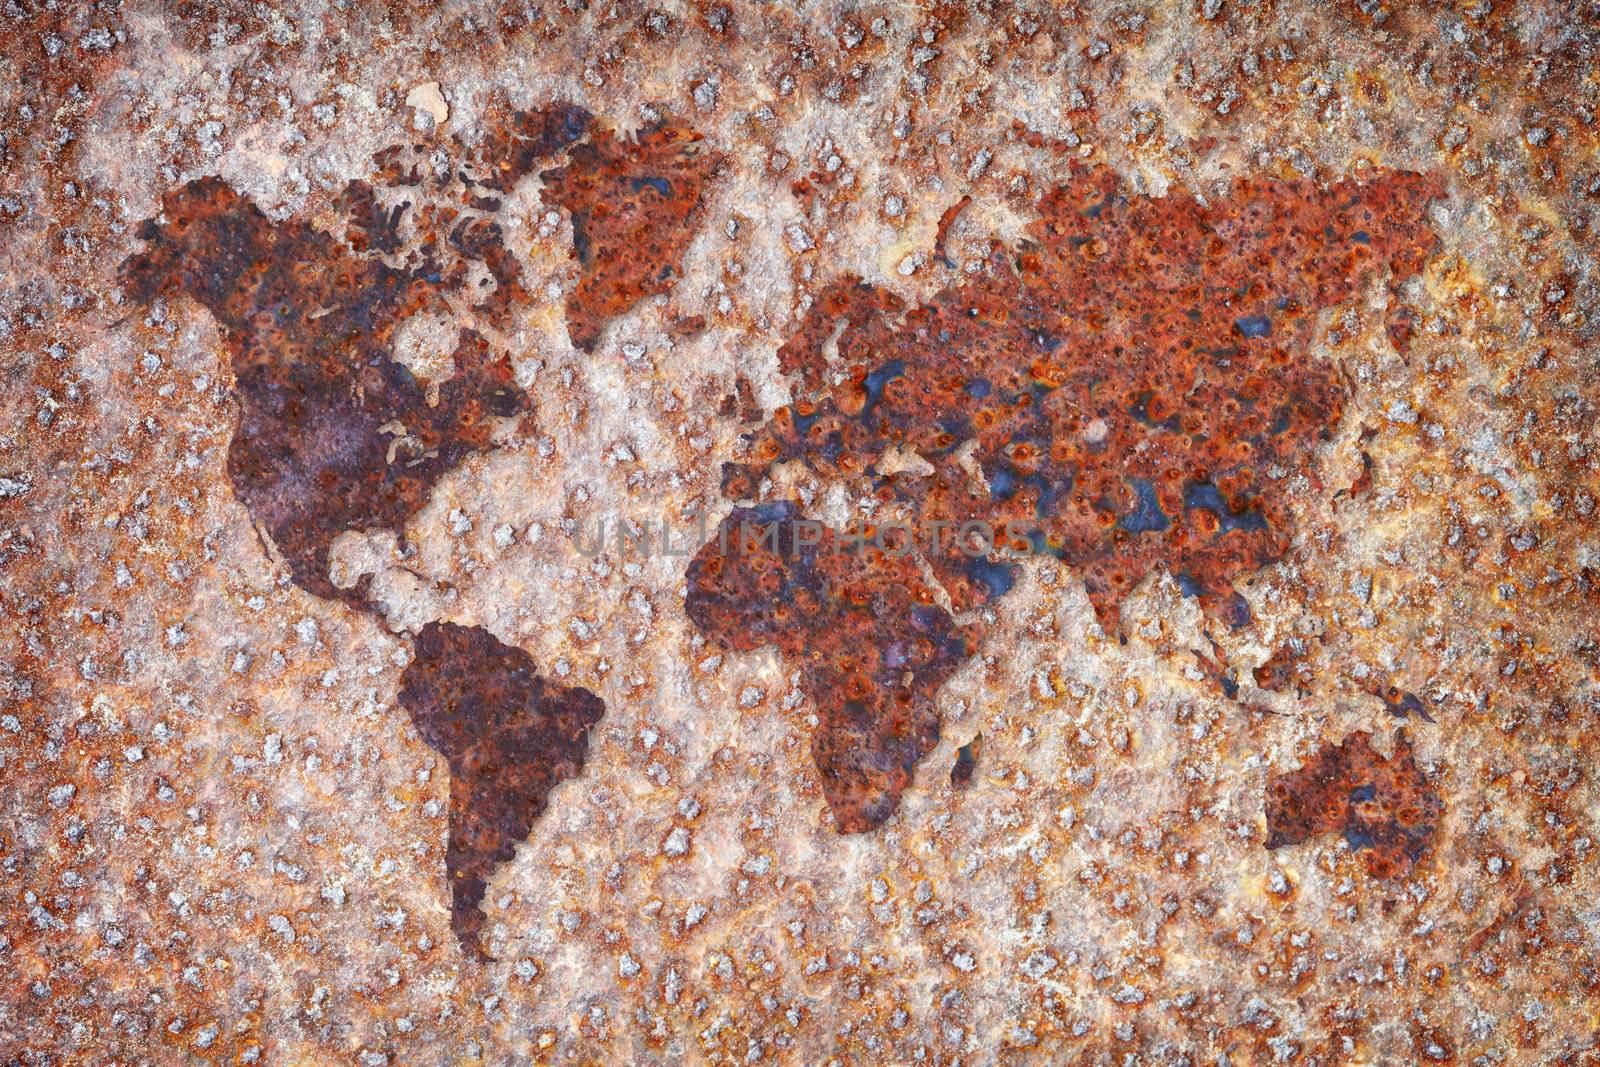 World map - corrosion stains on metal by pzaxe